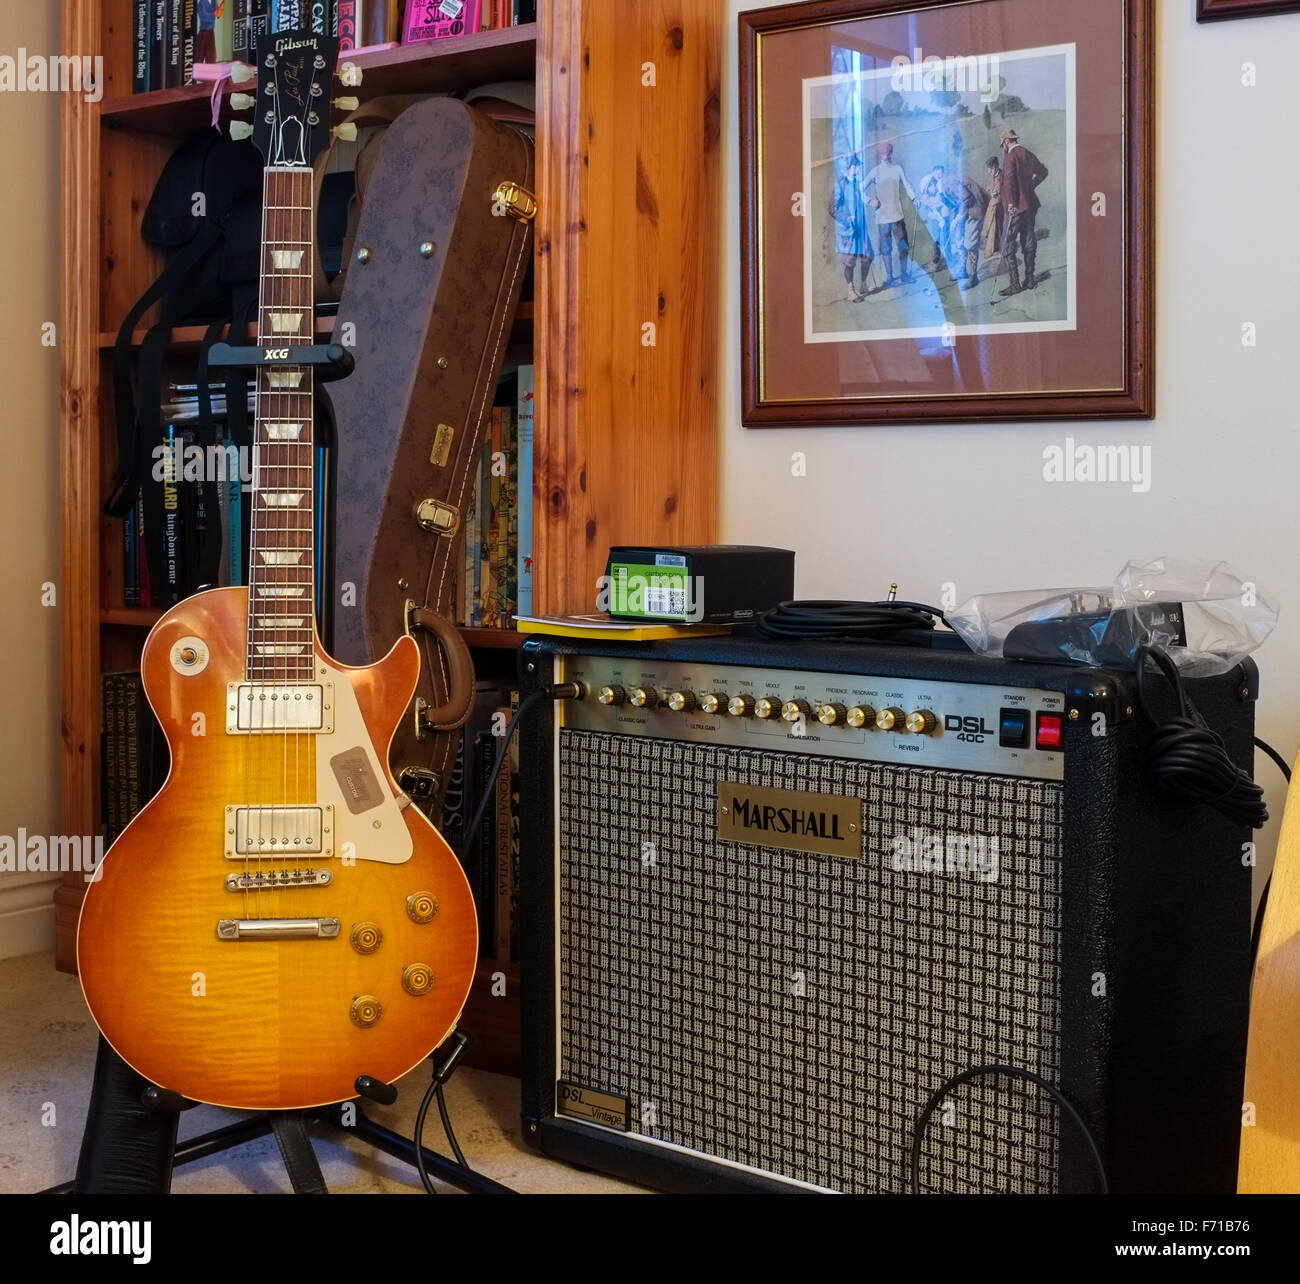 2015. A 1958 Gibson Les Paul guitar on it's stand next to a Marshall tube amplifier. The guitar's case in the background. Stock Photo